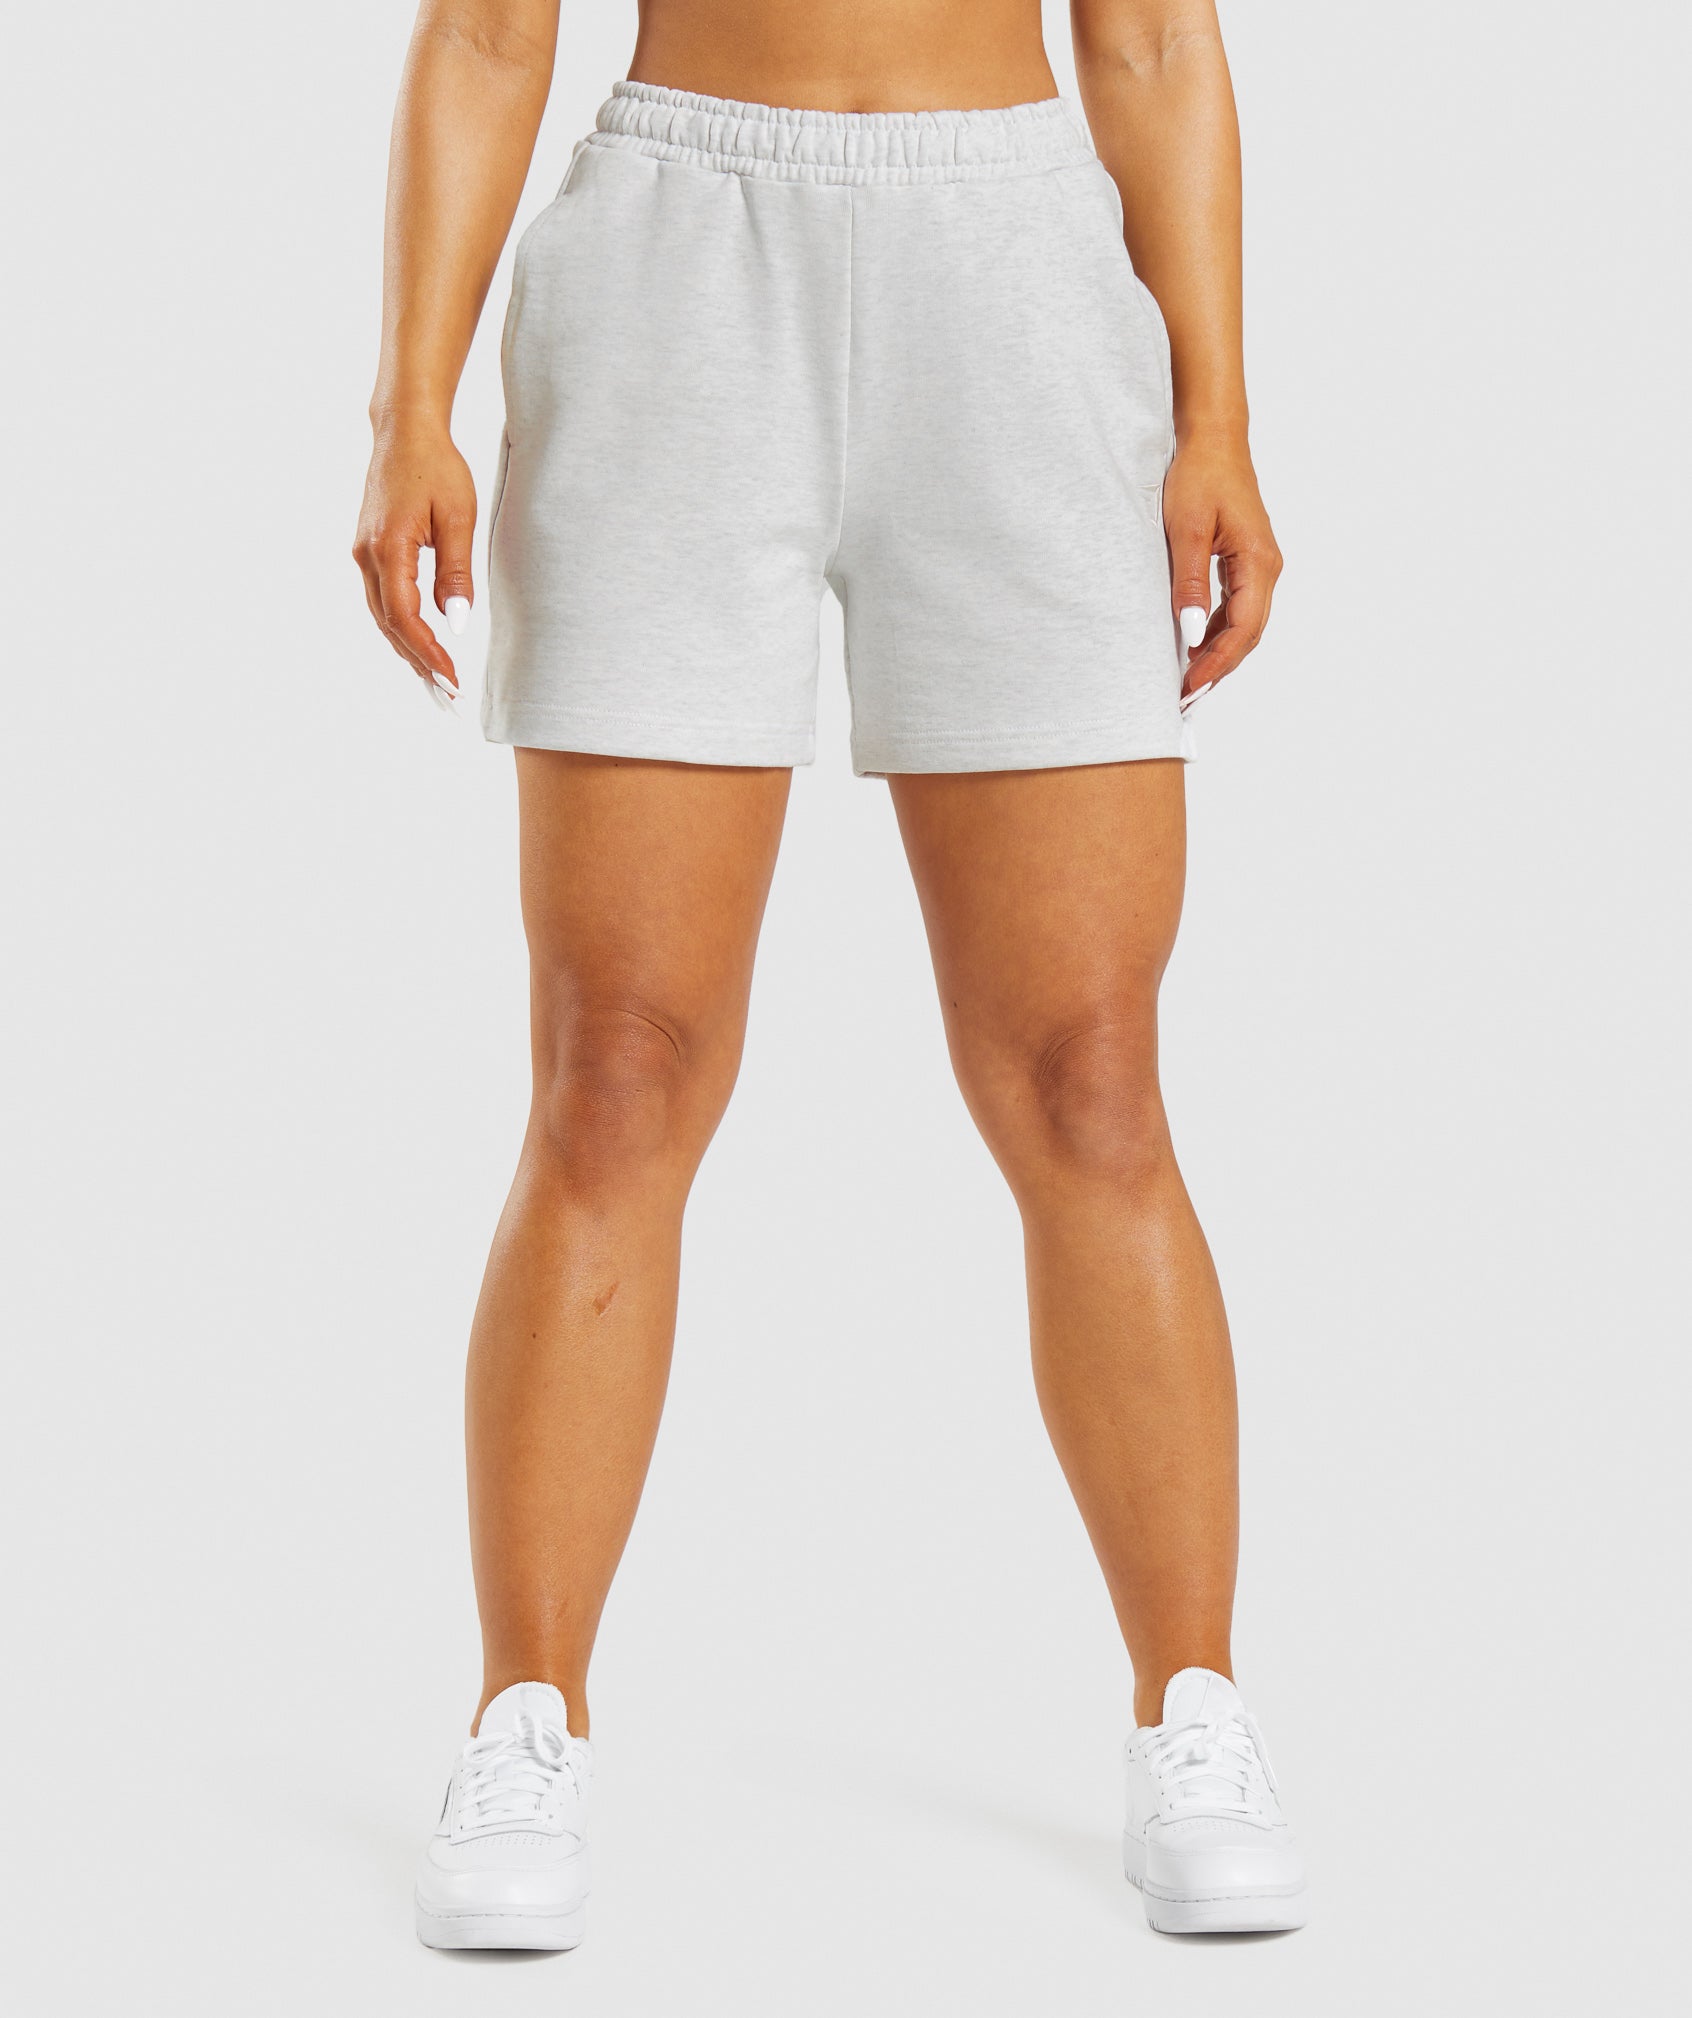 Rest Day Sweats Shorts in Cloud Marl - view 1